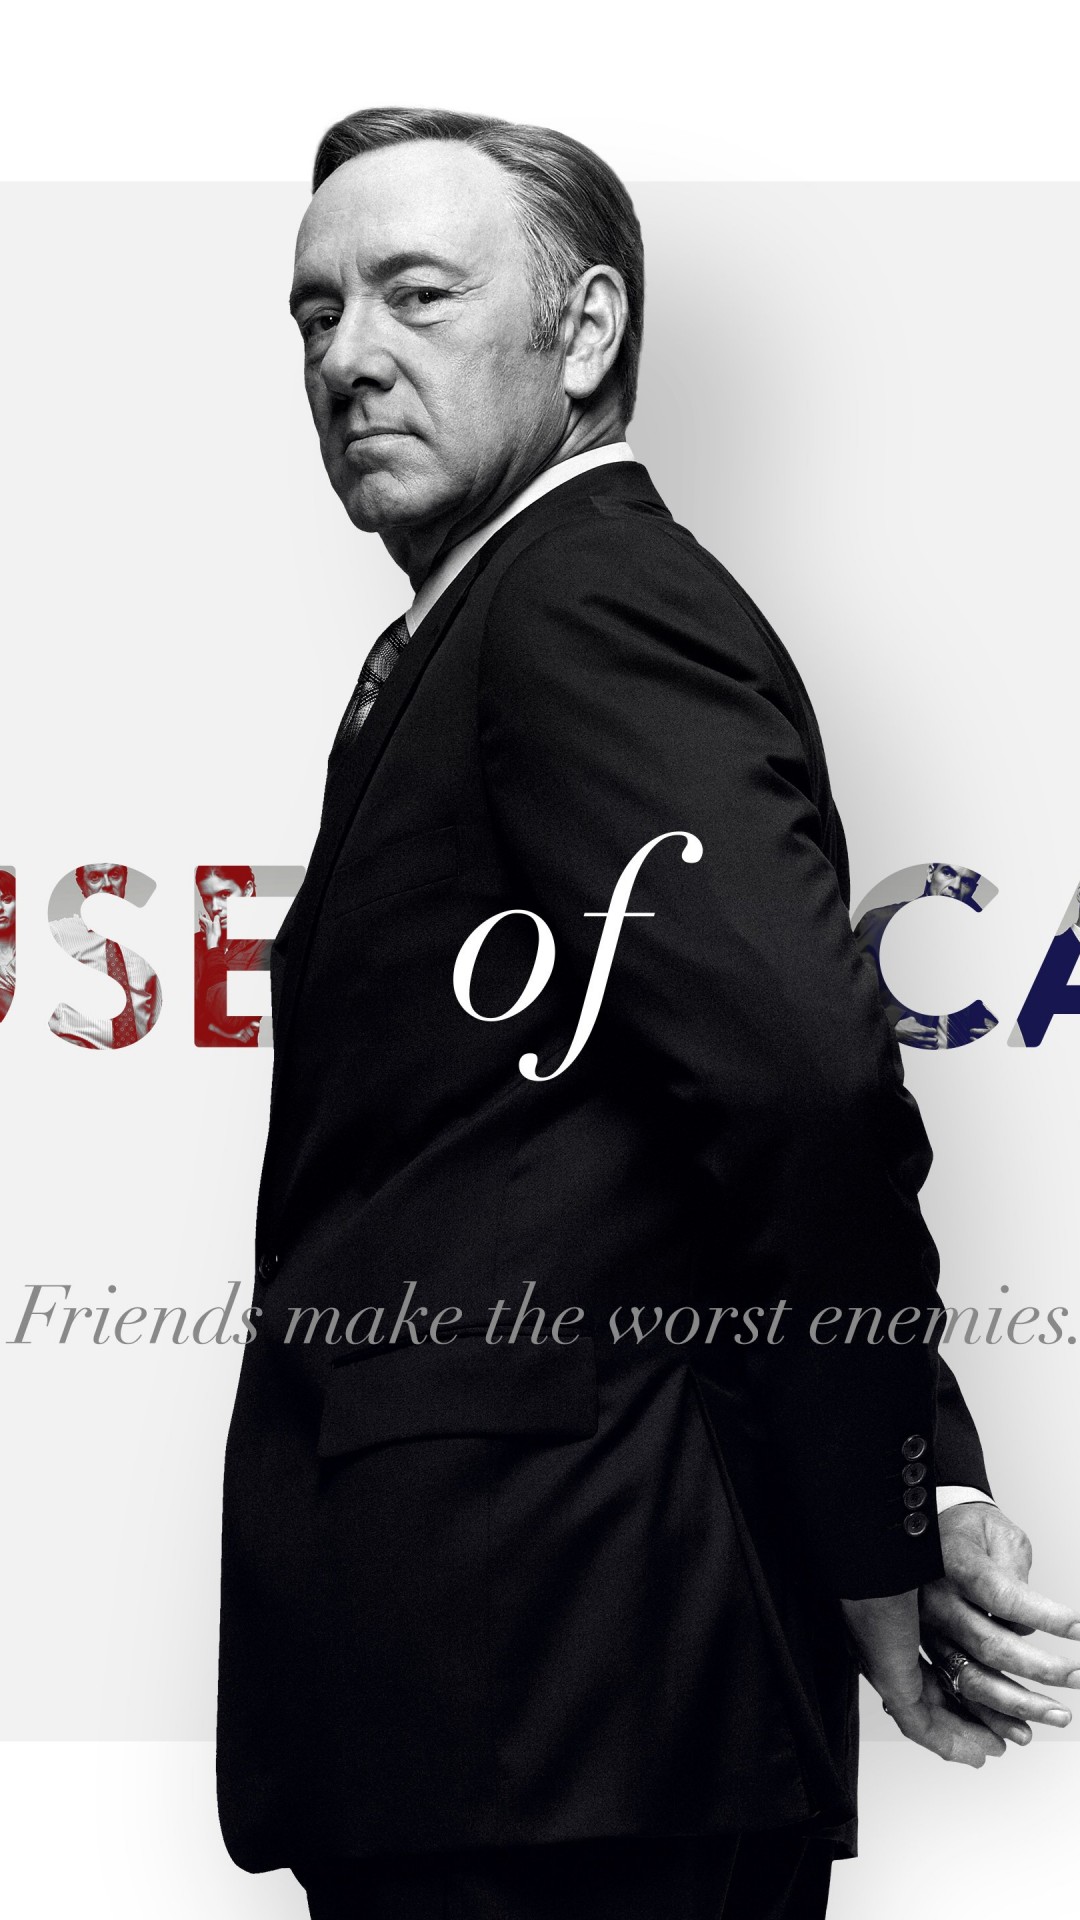 Frank Underwood - House of Cards Wallpaper for LG G2